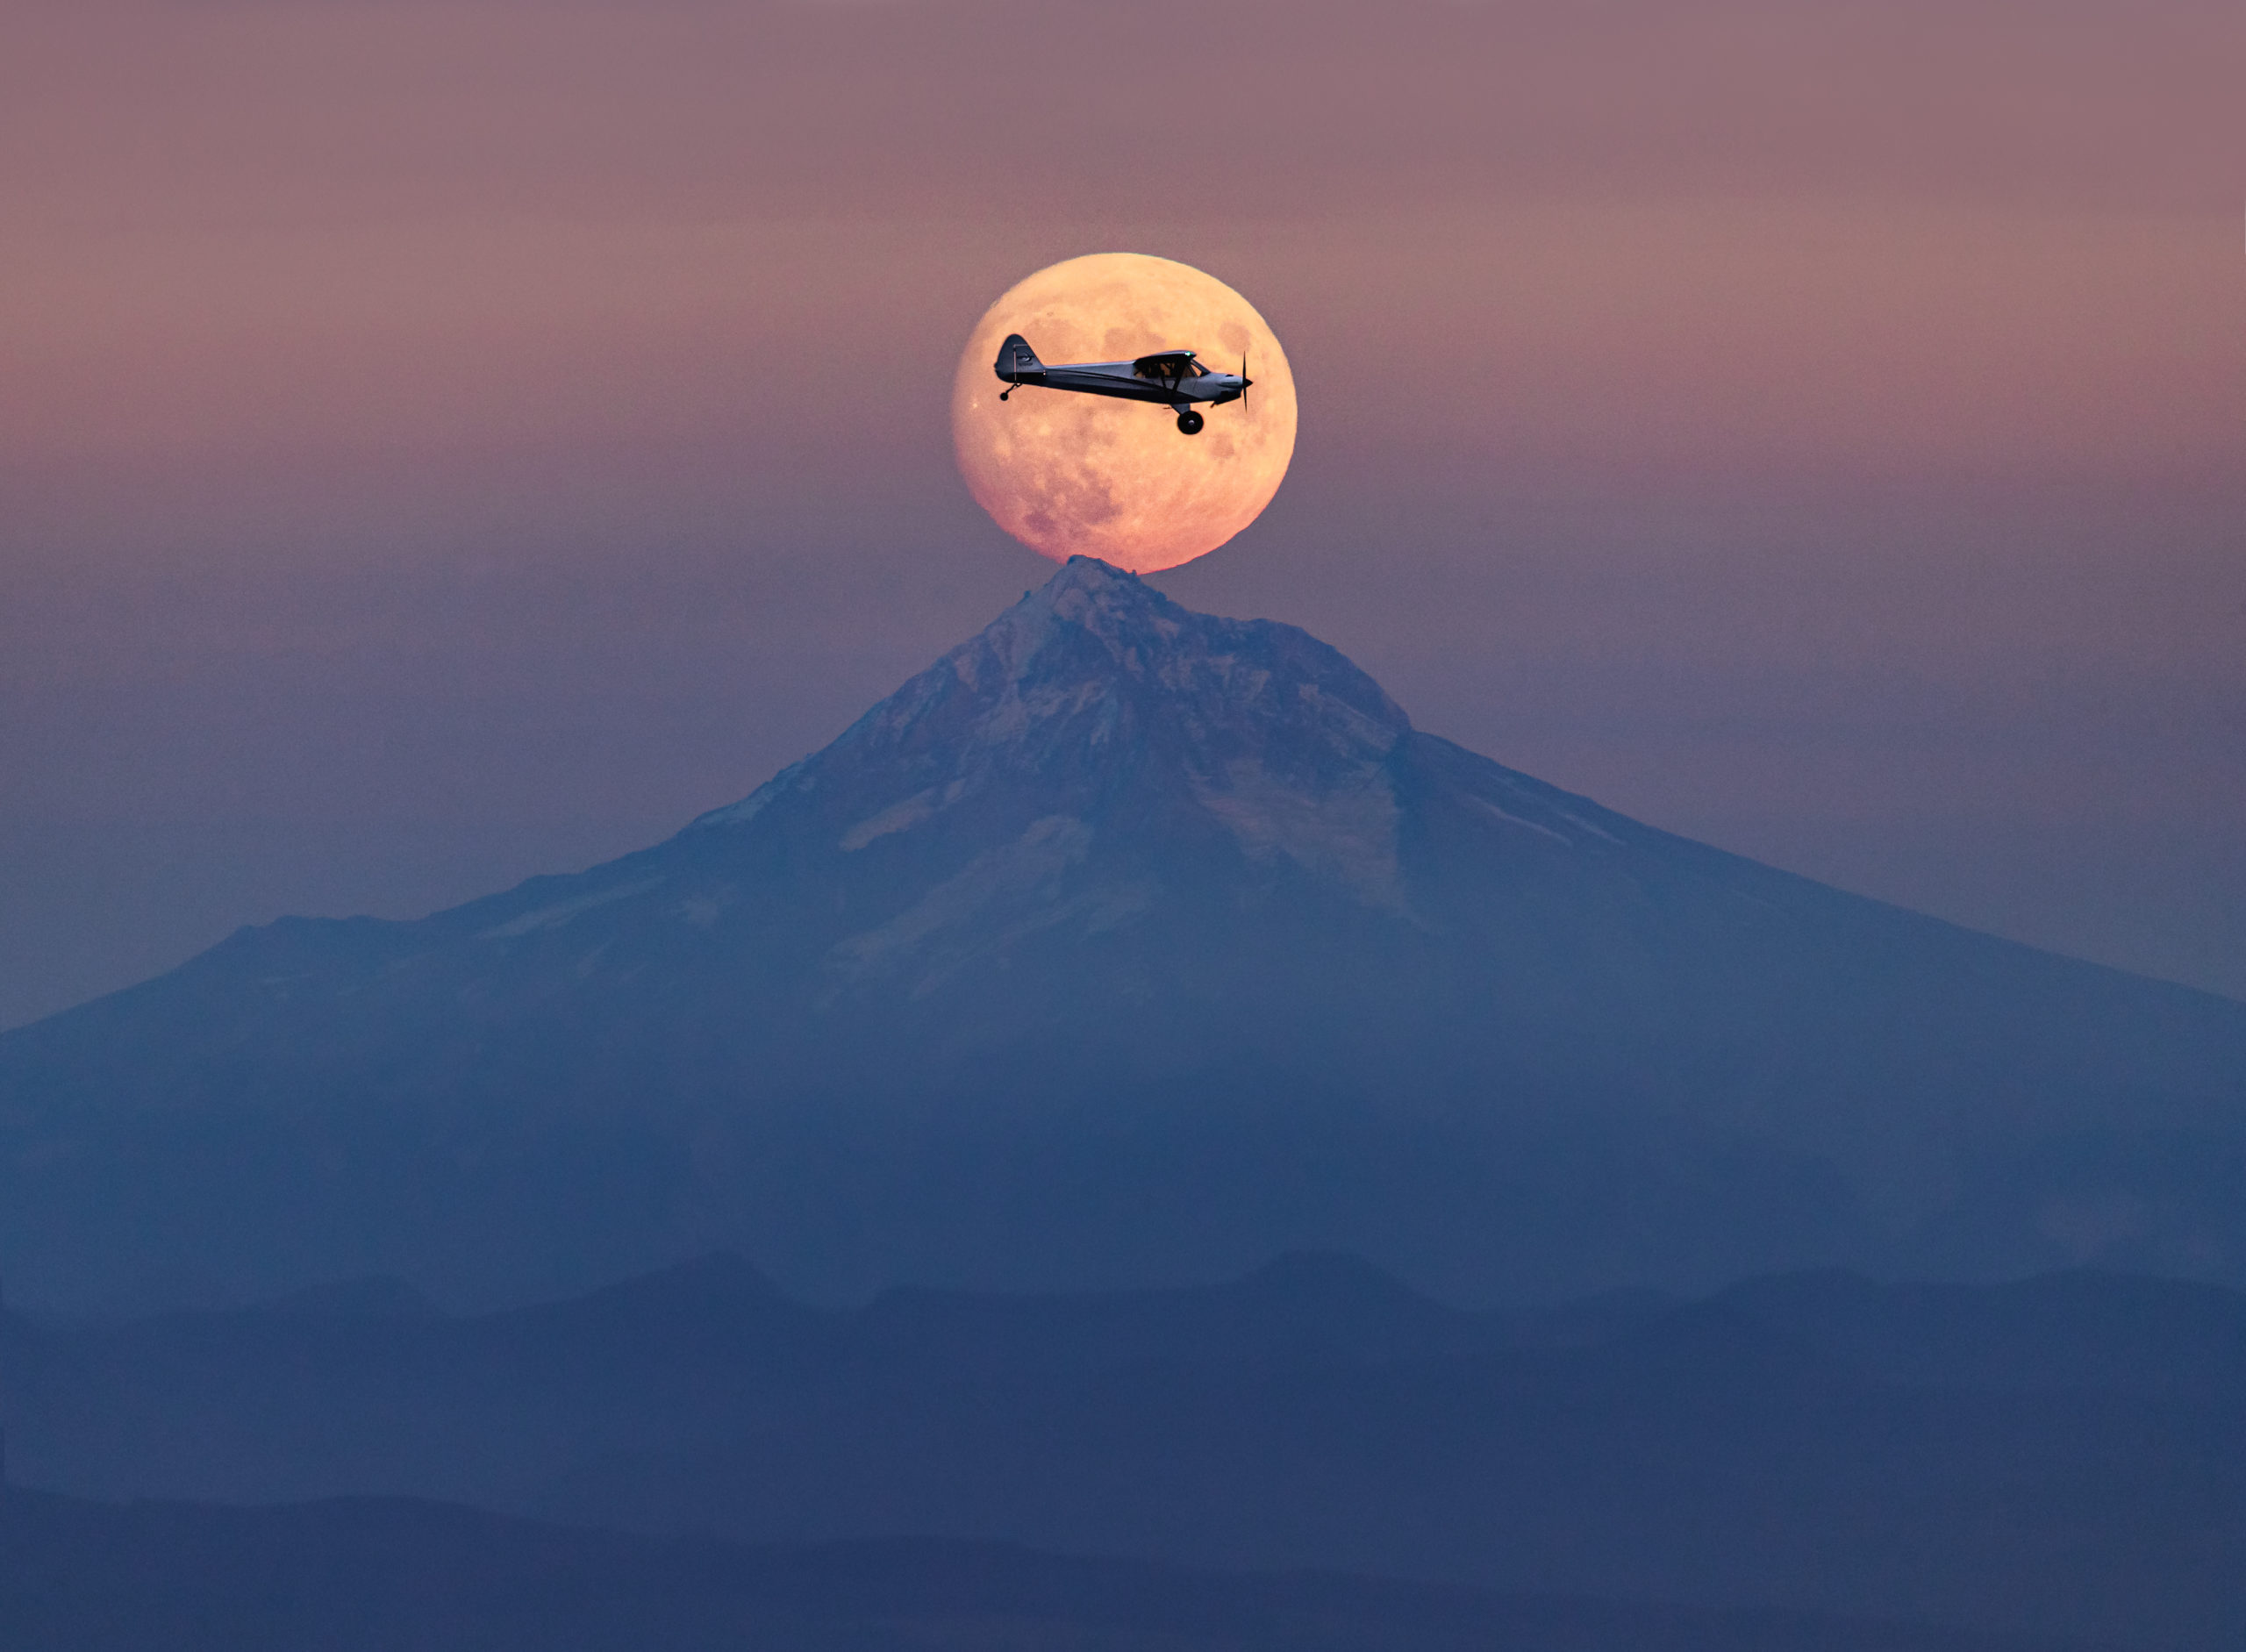 Aviation photography of a Carbon Cub airplane inside the rising full moon at sunset over Mount Hood, Oregon